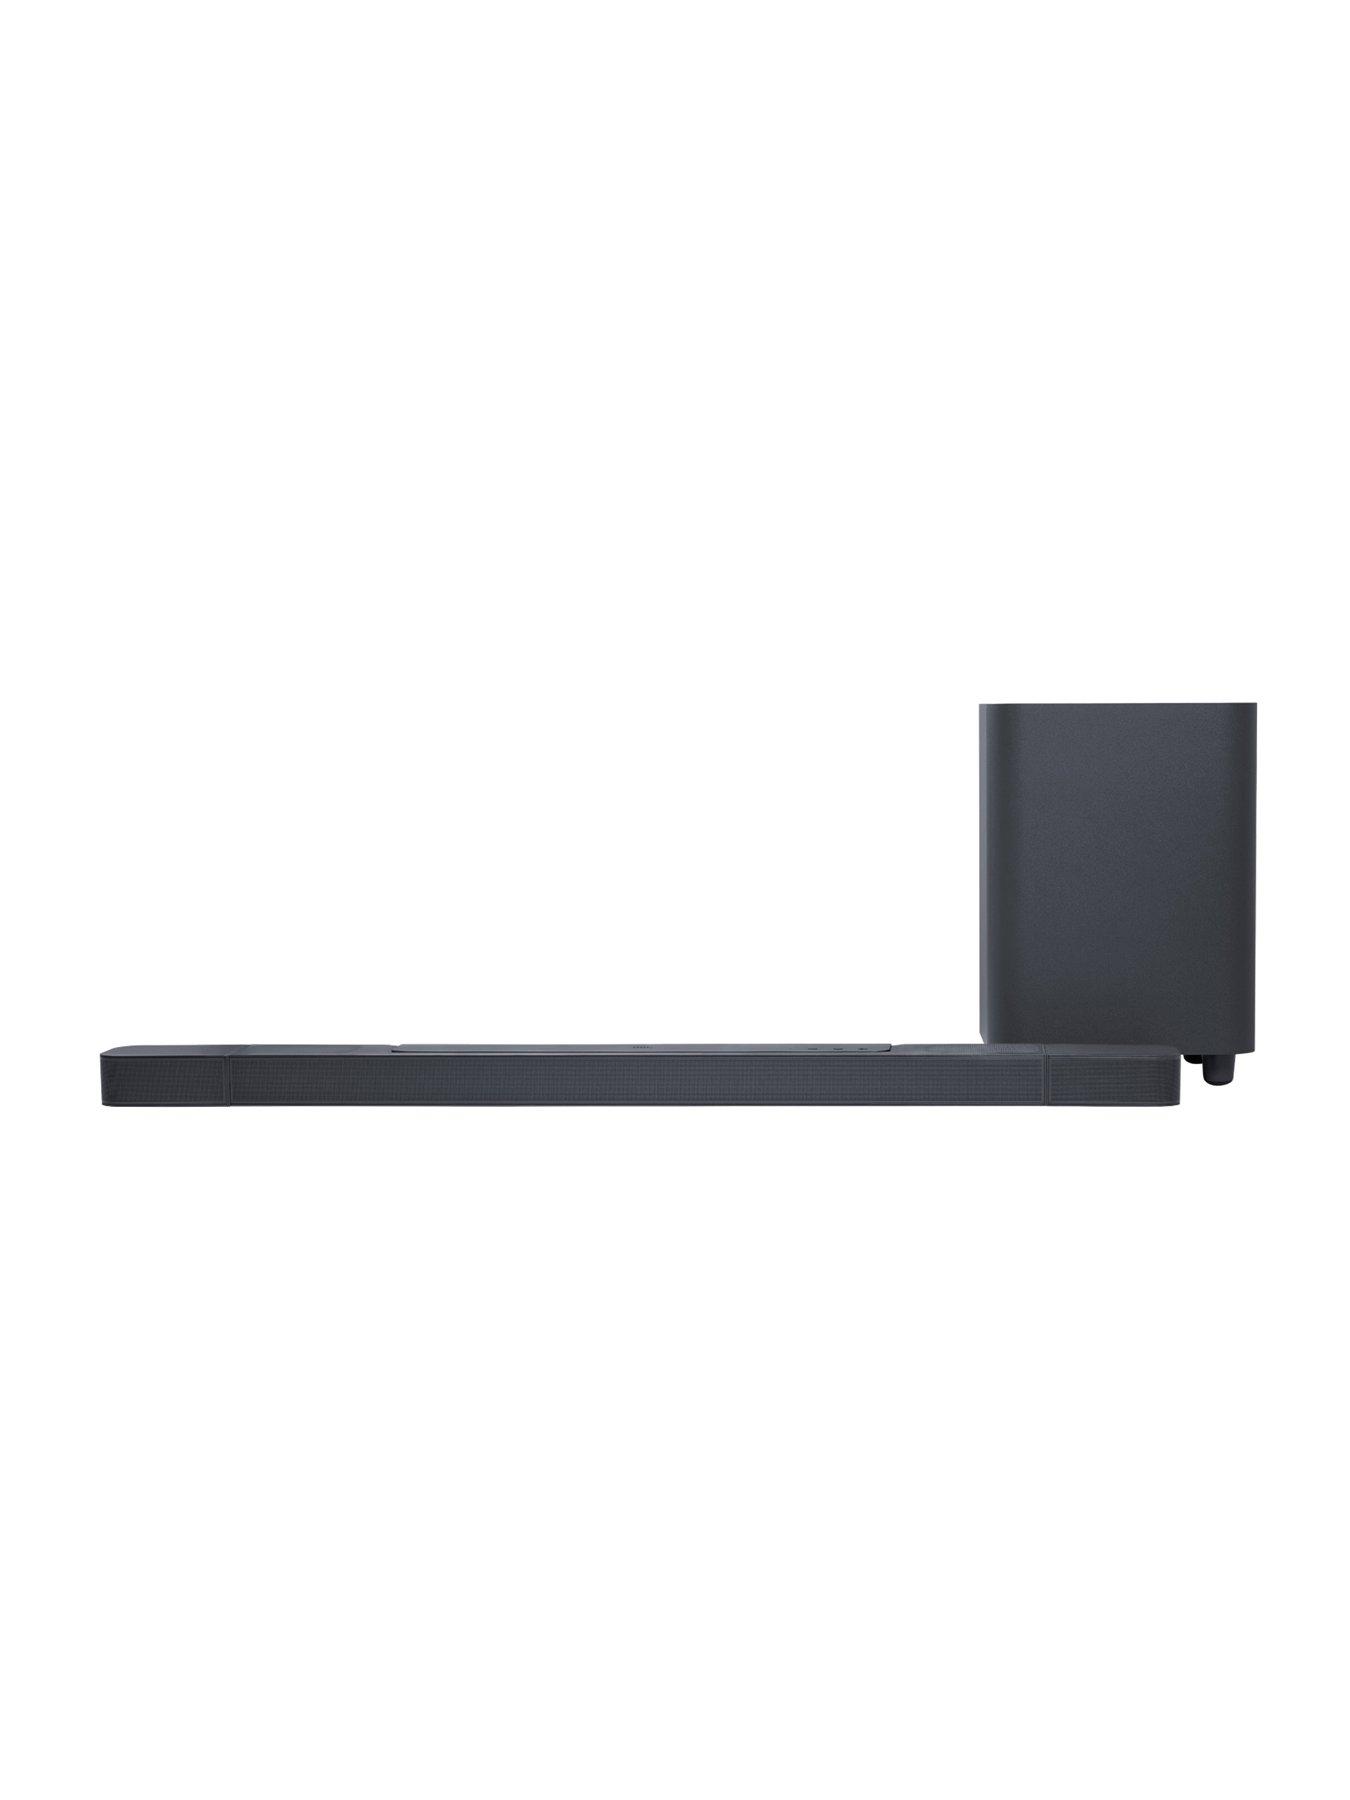 JBL Cinema Base Powered home theater sound system/TV platform with